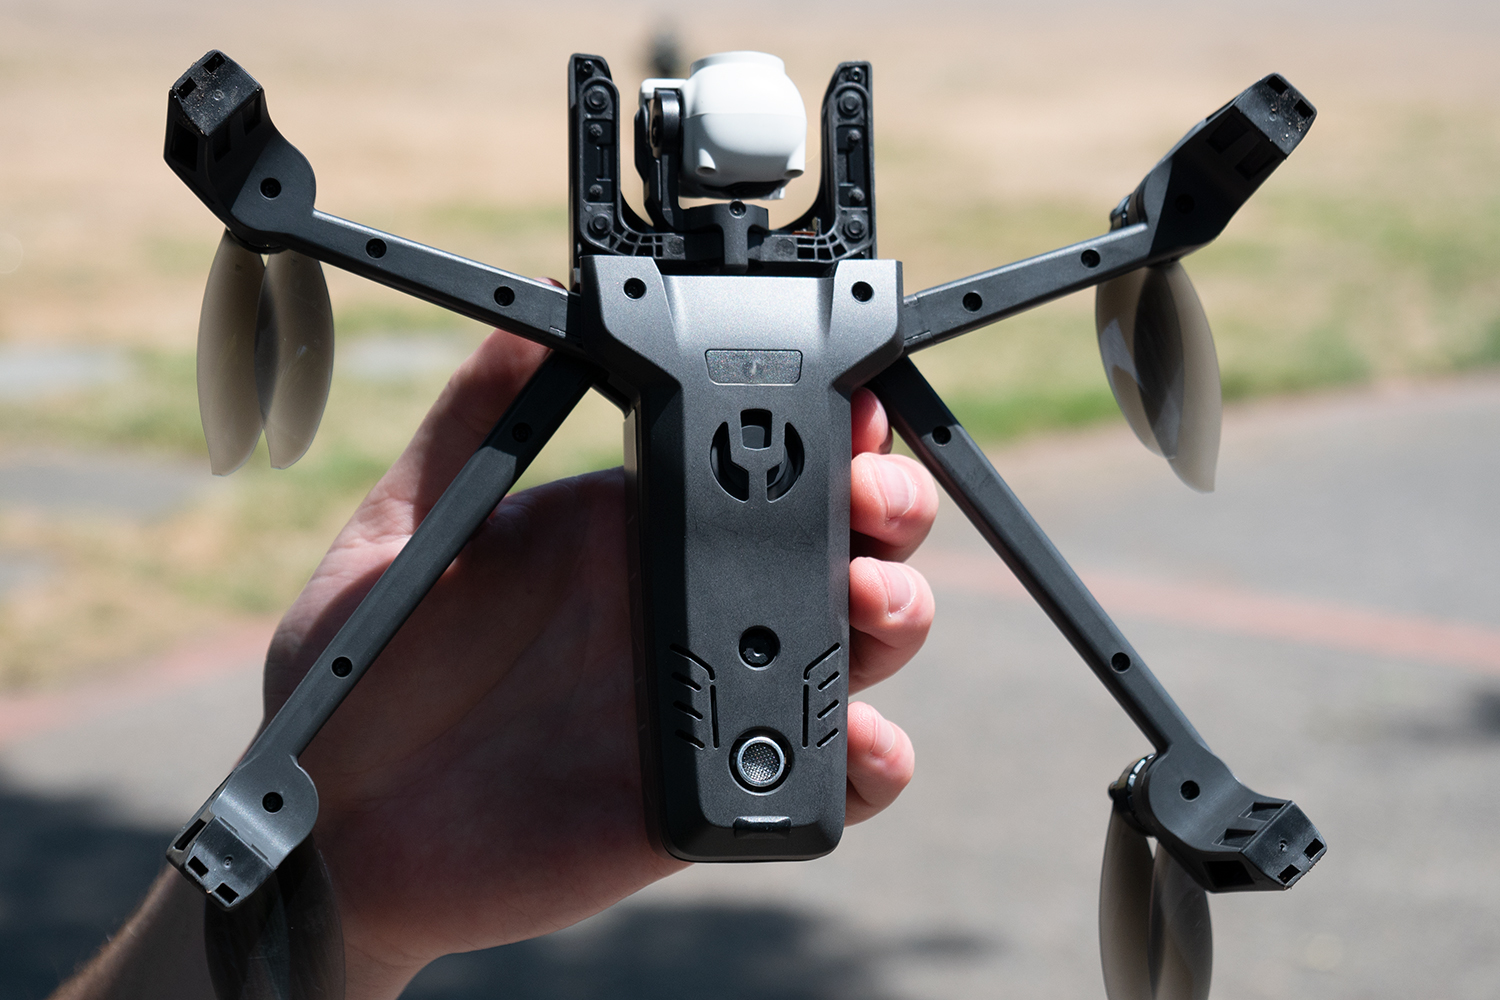 https://www.digitaltrends.com/wp-content/uploads/2018/06/parrot-anafi-drone-review-bottom.jpg?fit=1500%2C1000&p=1